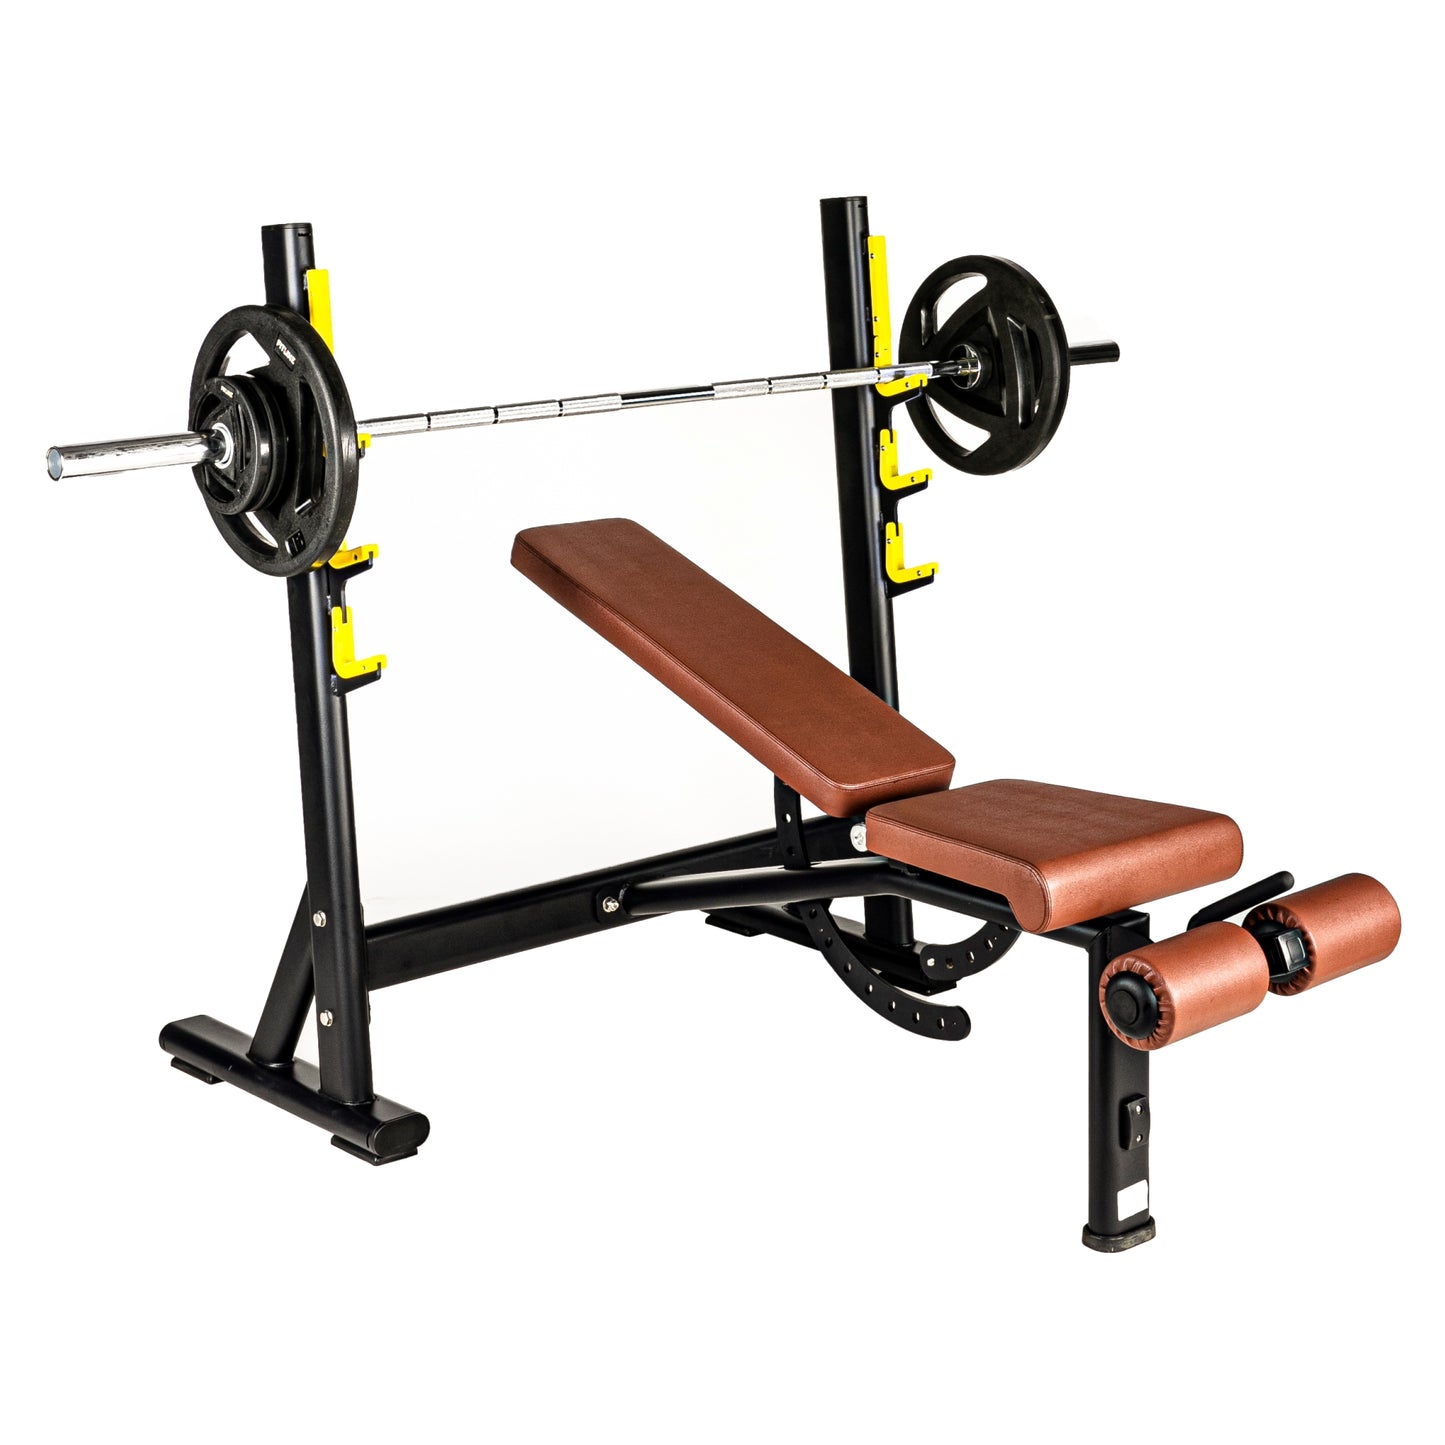 TS -202 - 3 IN 1 OLYMPIC BENCH - Exercise Equipment